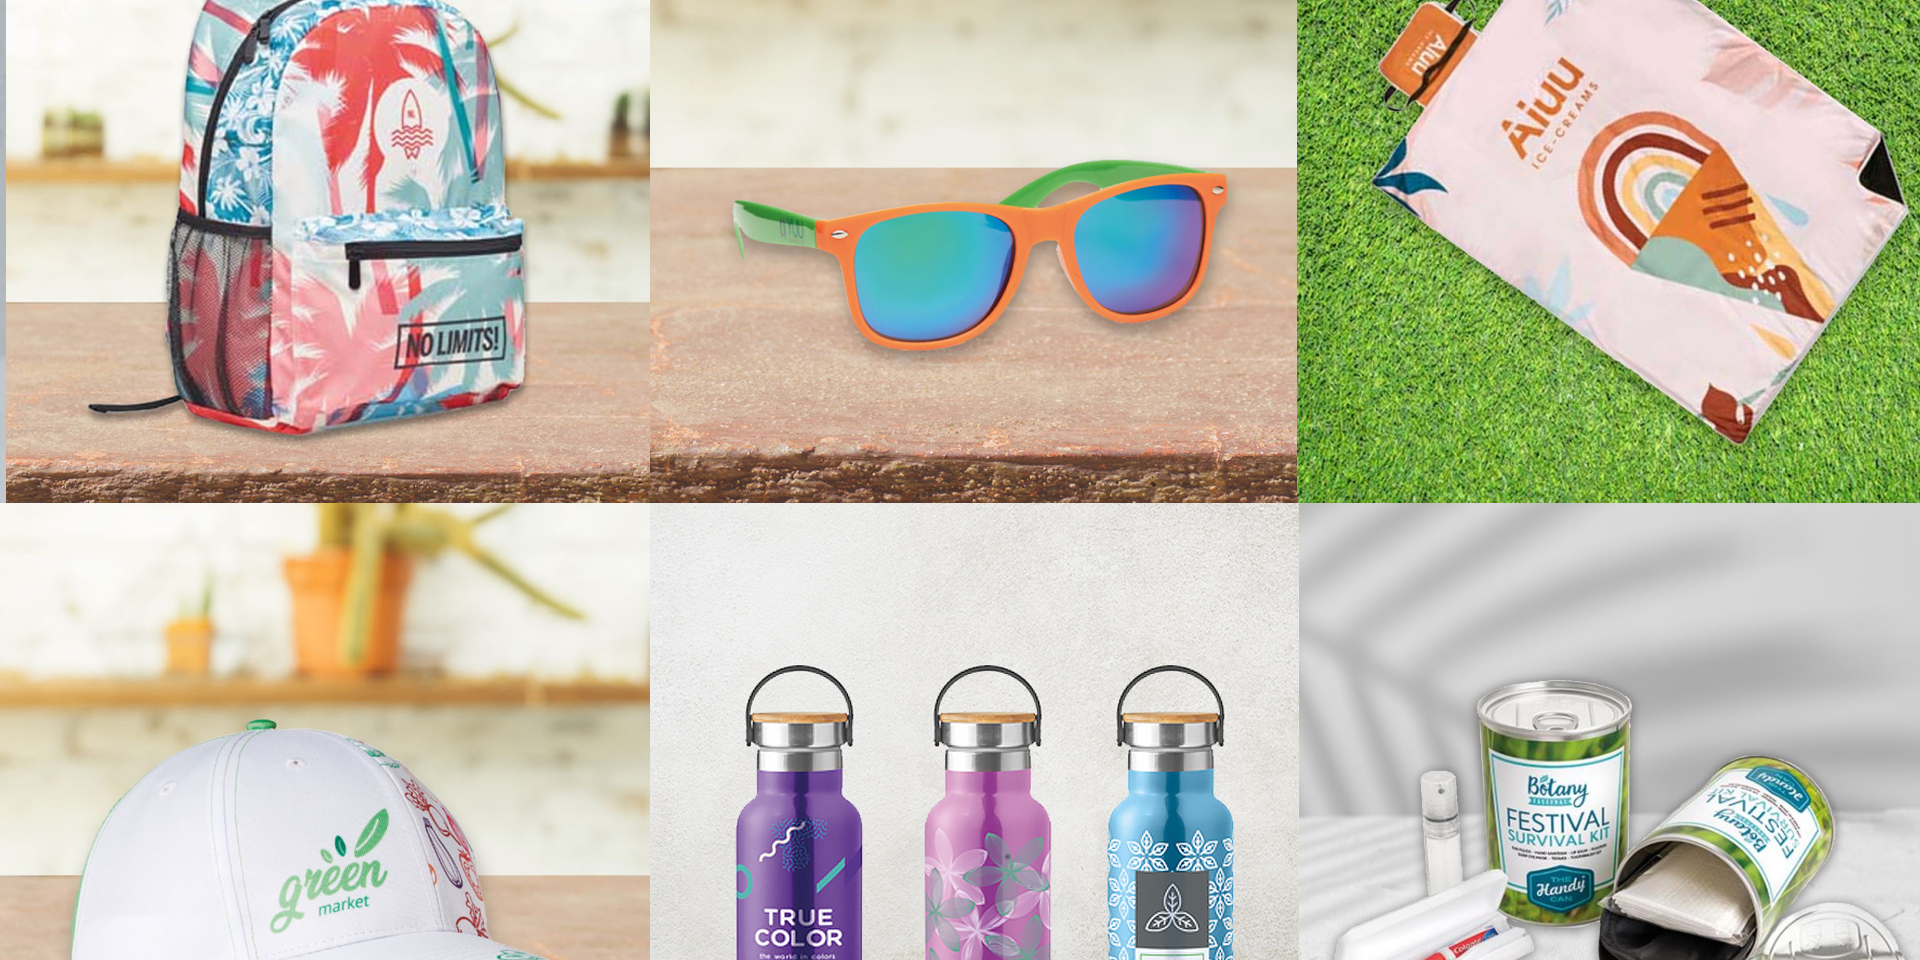 Promotional Products Blog Issue 85 - Increase your brand awareness with Summer vibes!